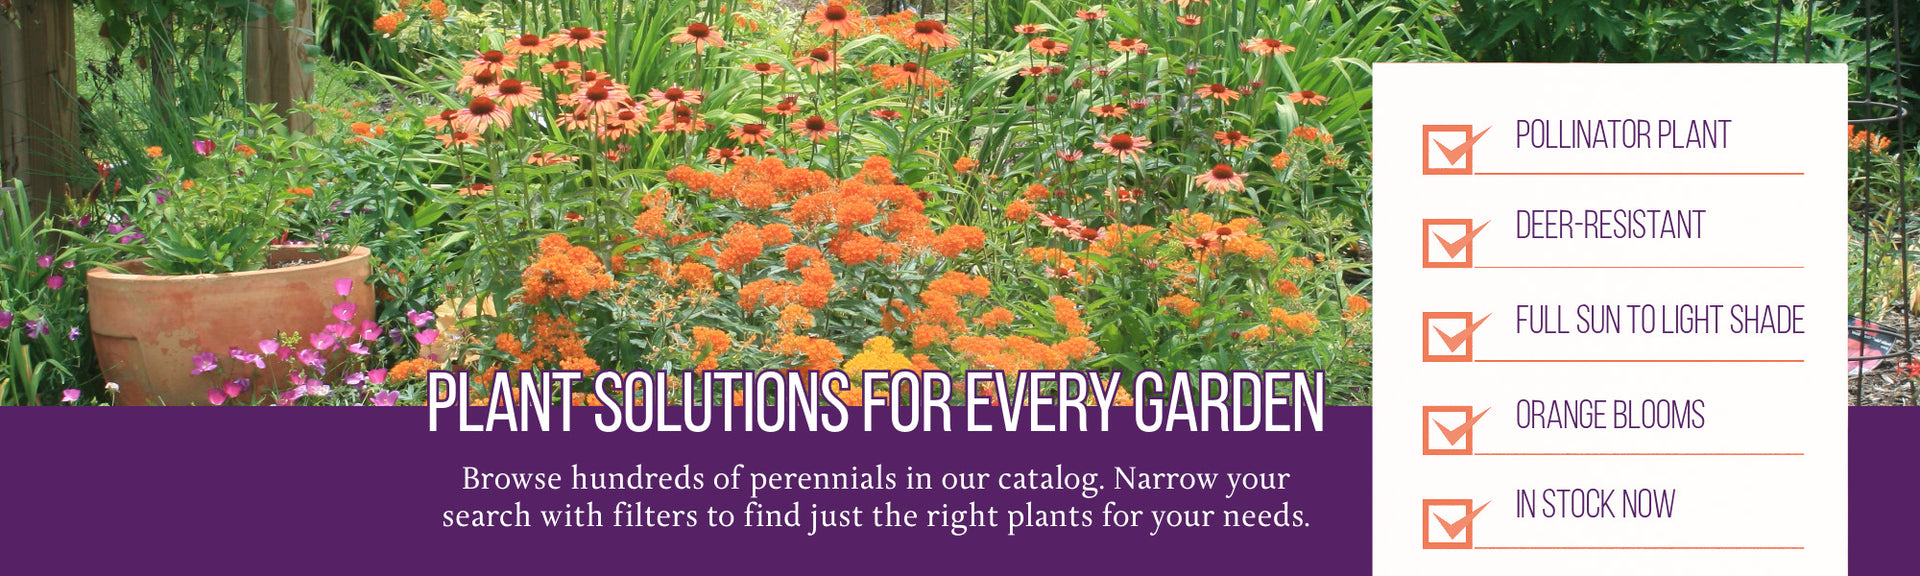 Plant solutions for every garden. Browse hundreds of perennials in our catalog. Narrow your search with filters to find just the right plants for your needs.